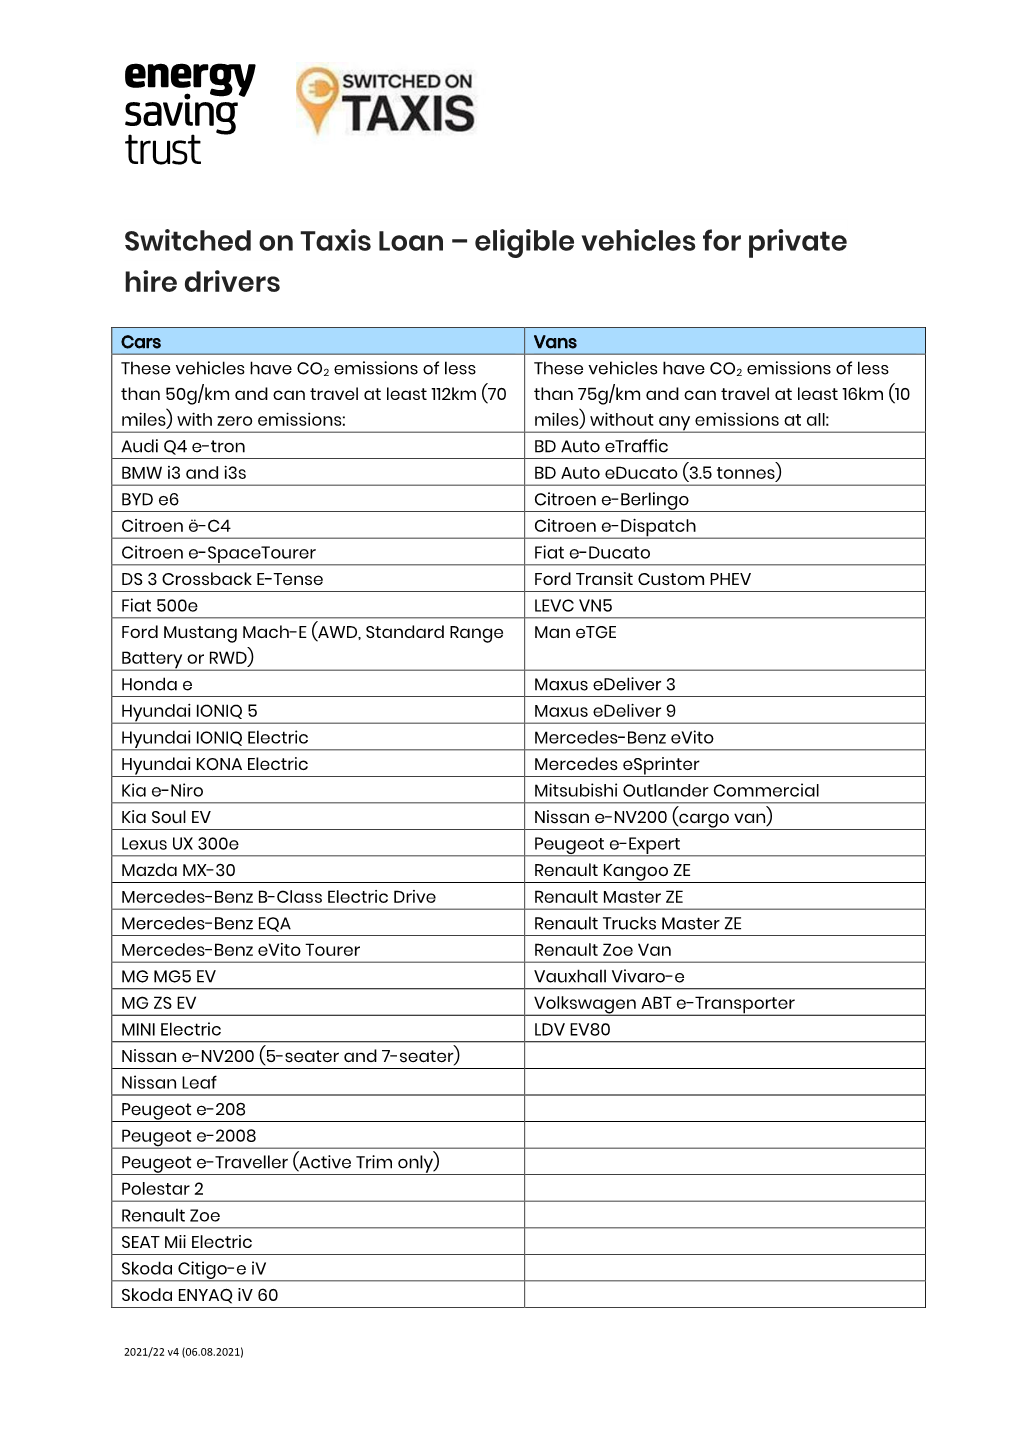 Switched on Taxis Loan – Eligible Vehicles for Private Hire Drivers